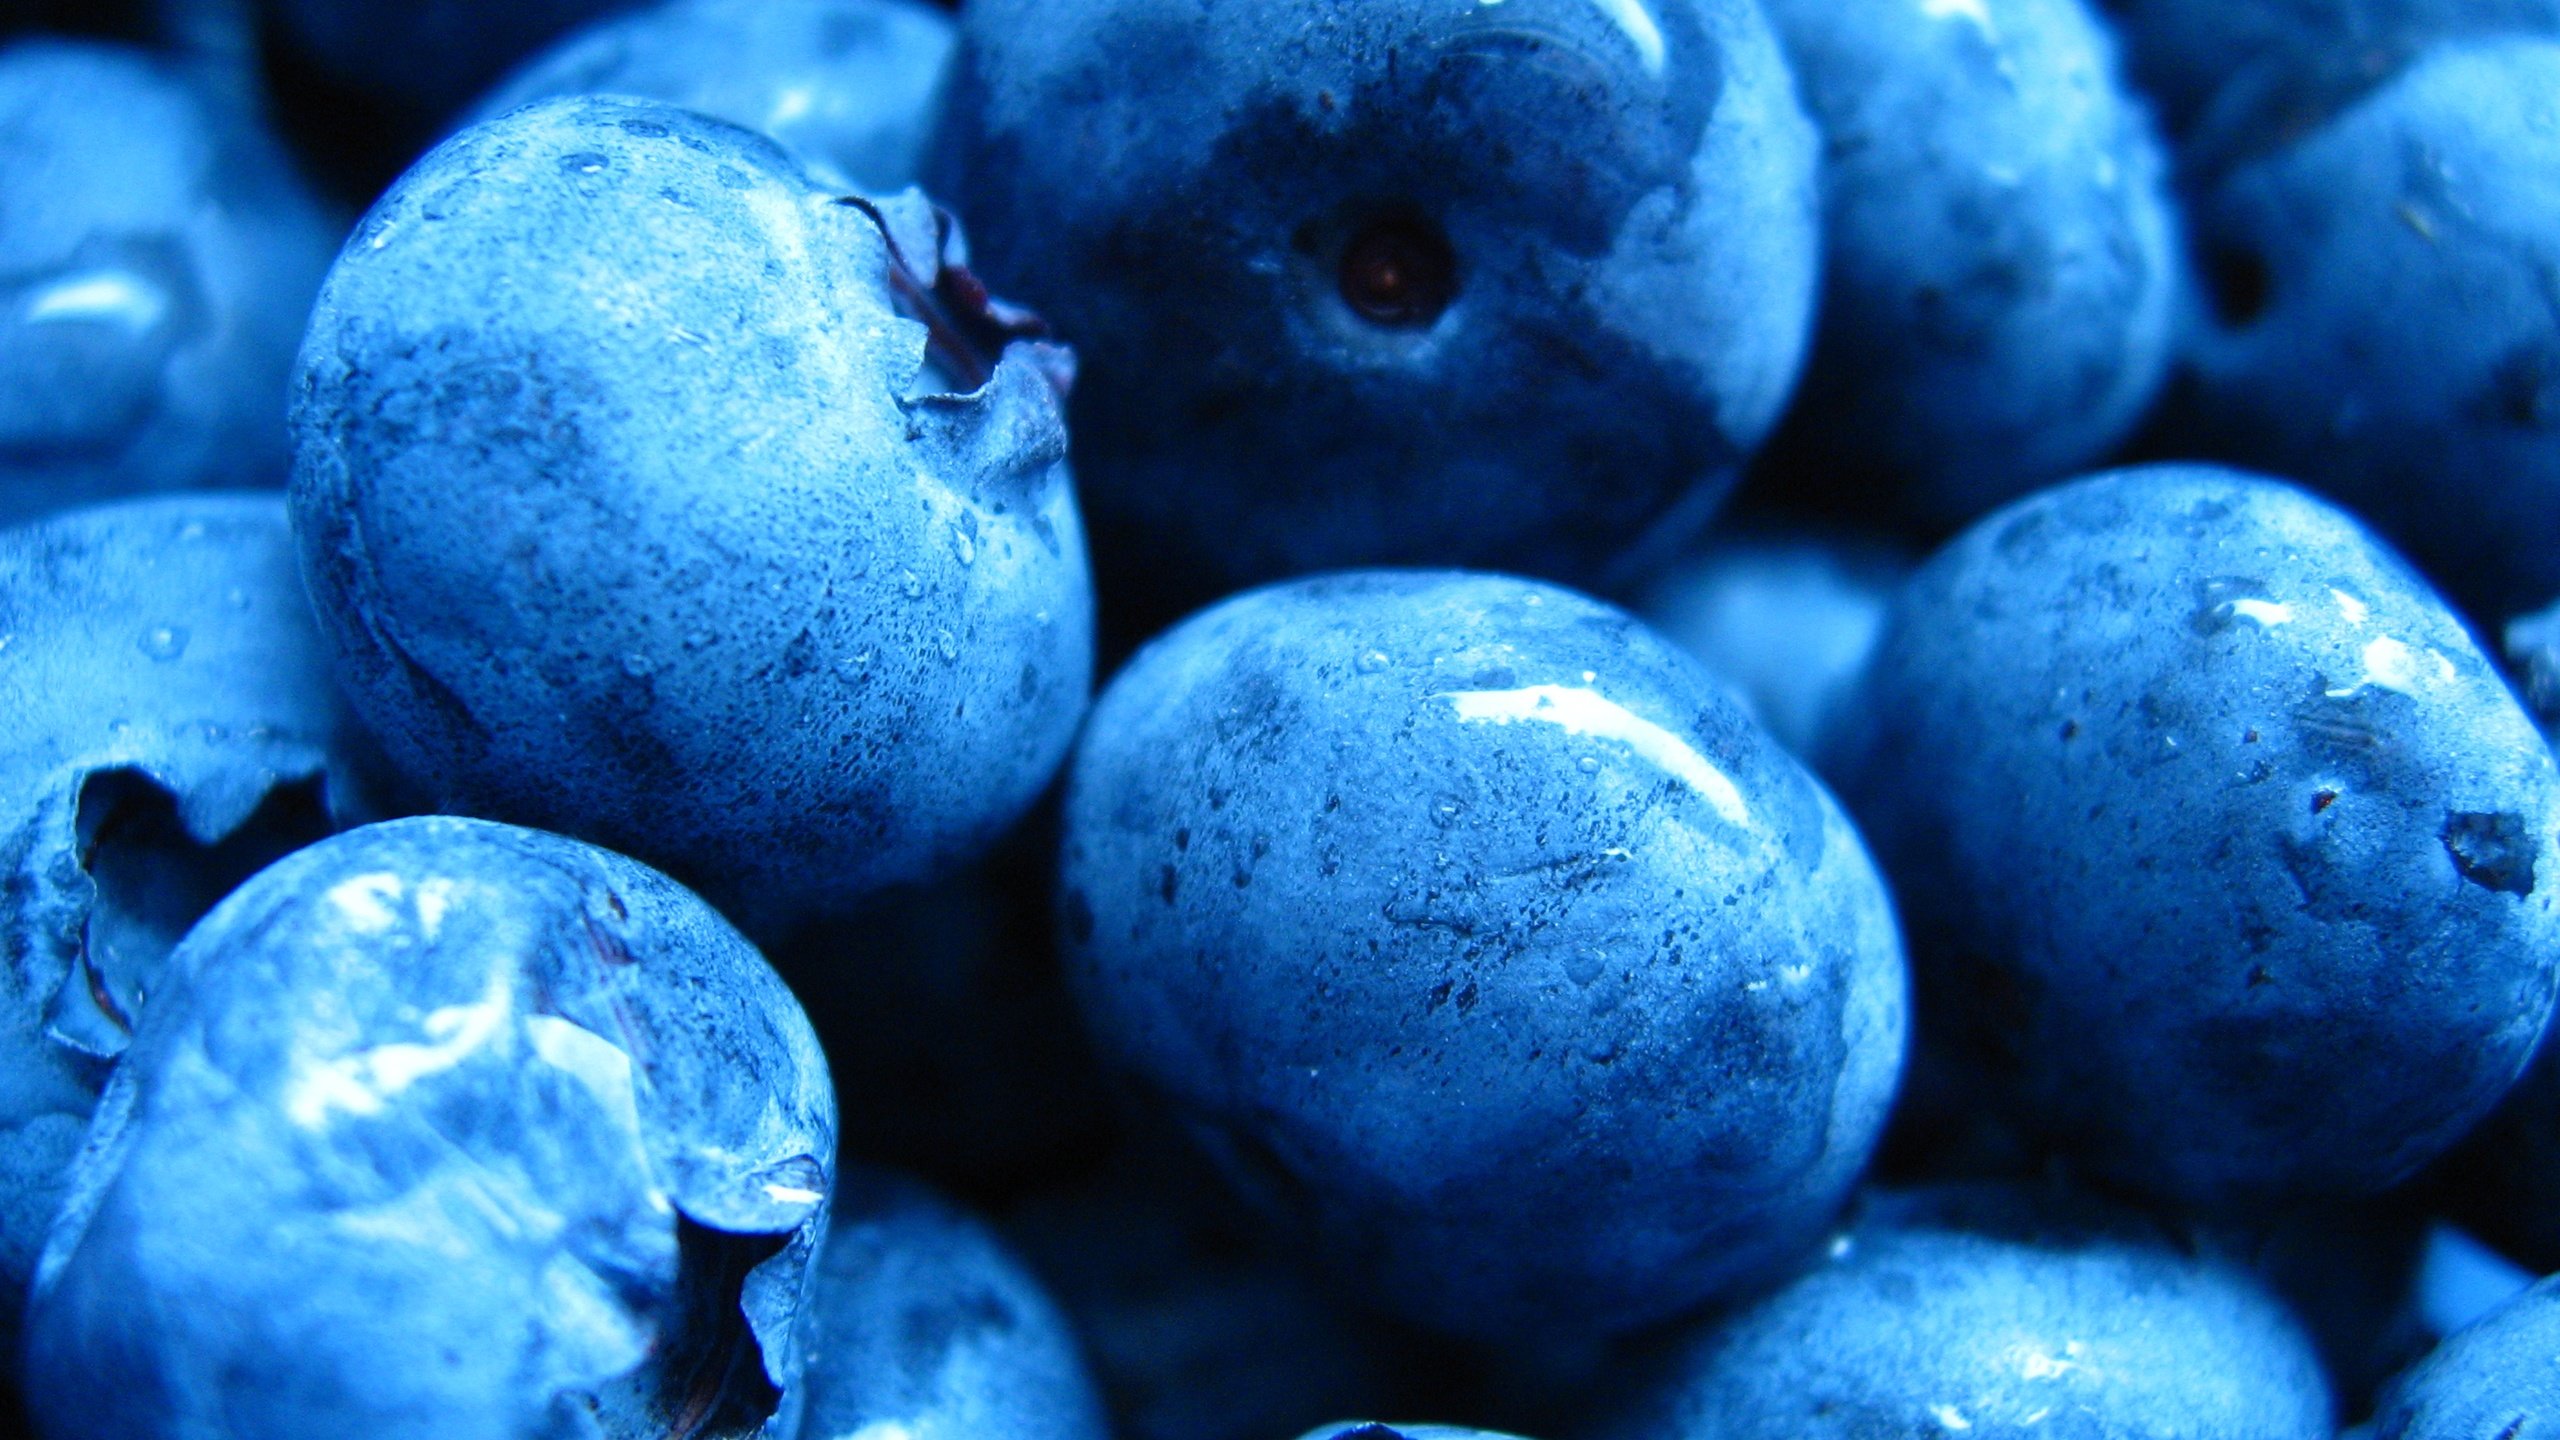 Free Blueberry high quality wallpaper ID:68991 for hd 2560x1440 desktop